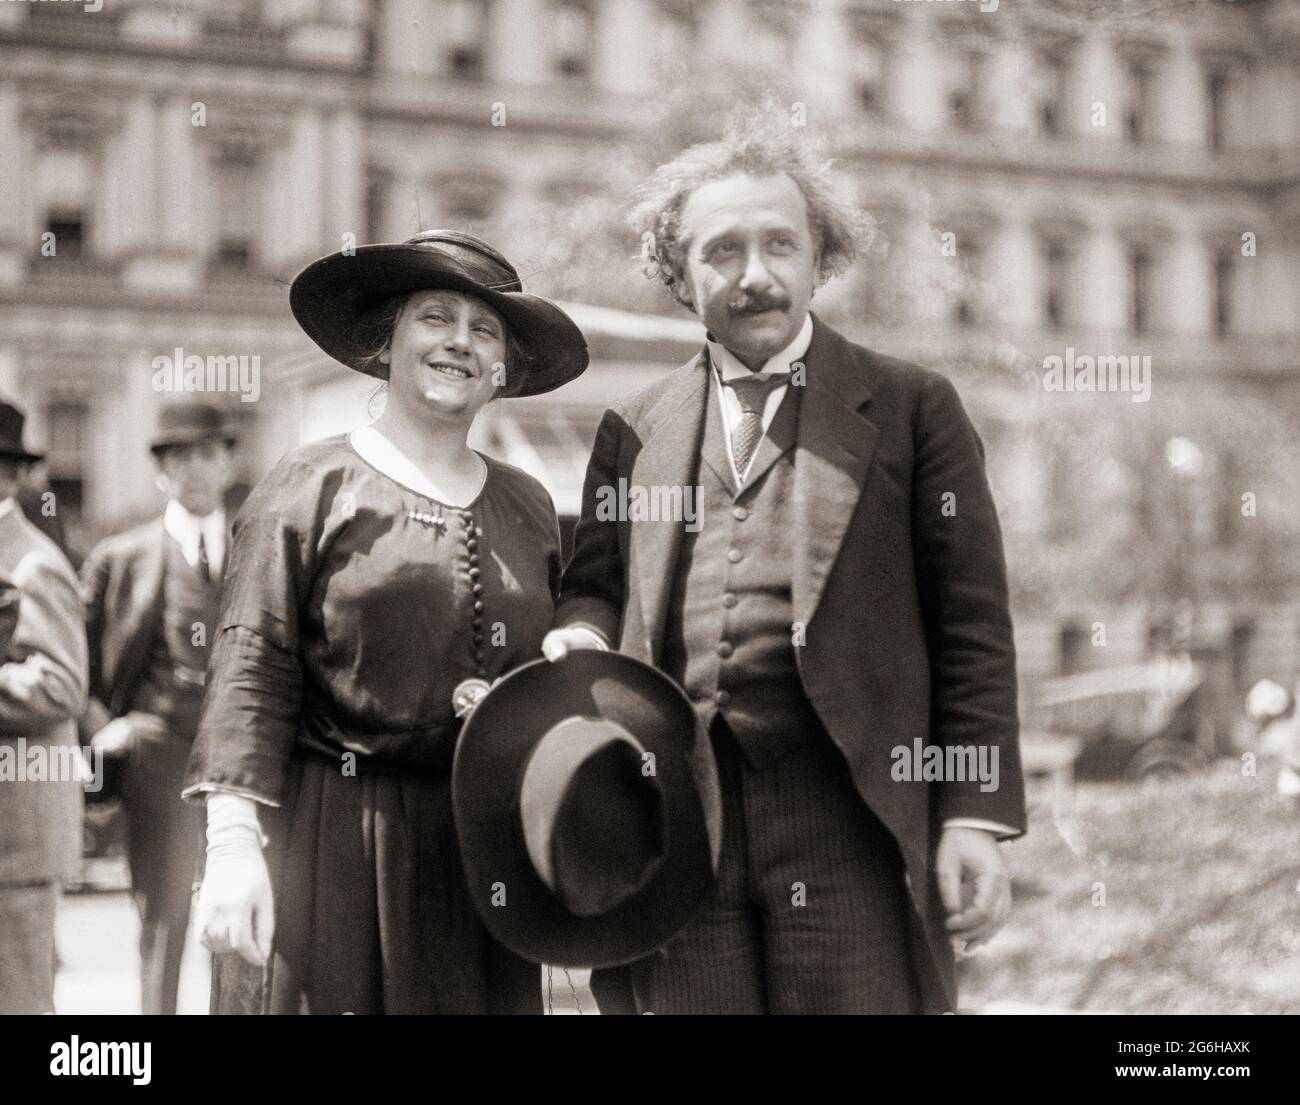 Albert Einstein with his wife Elsa in the early 1920's.  Albert Einstein, 1879 - 1955.  German born theoretical physicist.   Amongst many accomplishments he posited theories of General Relativity, Special Relativity, and mass–energy equivalence.  Elsa Einstein, 1876 - 1936.  German born second wife and cousin of Albert. Stock Photo